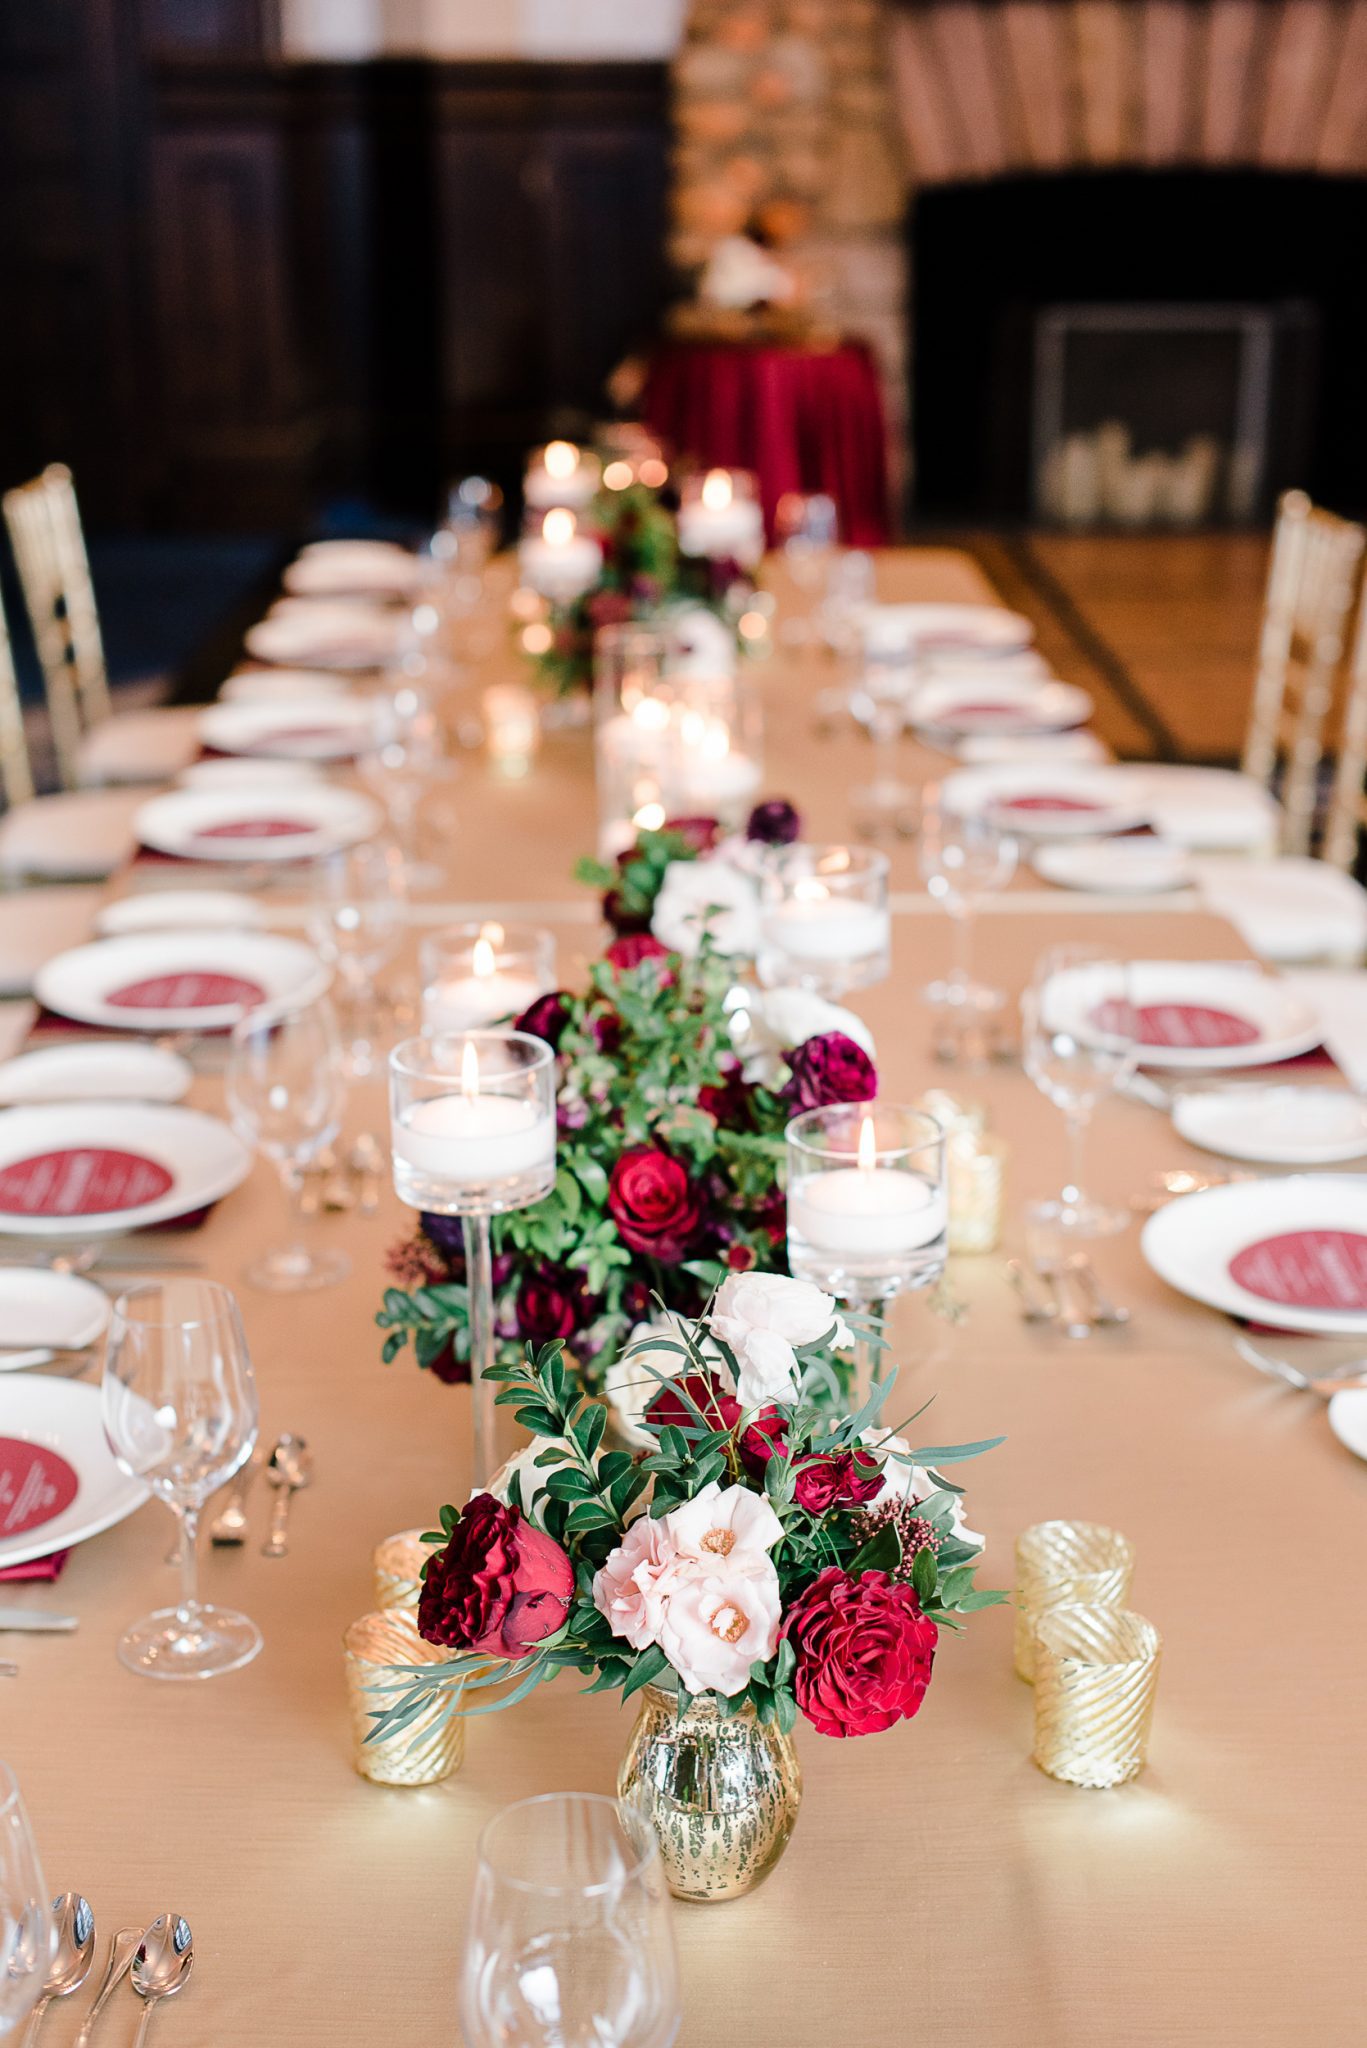 Red and white winter wedding table decor